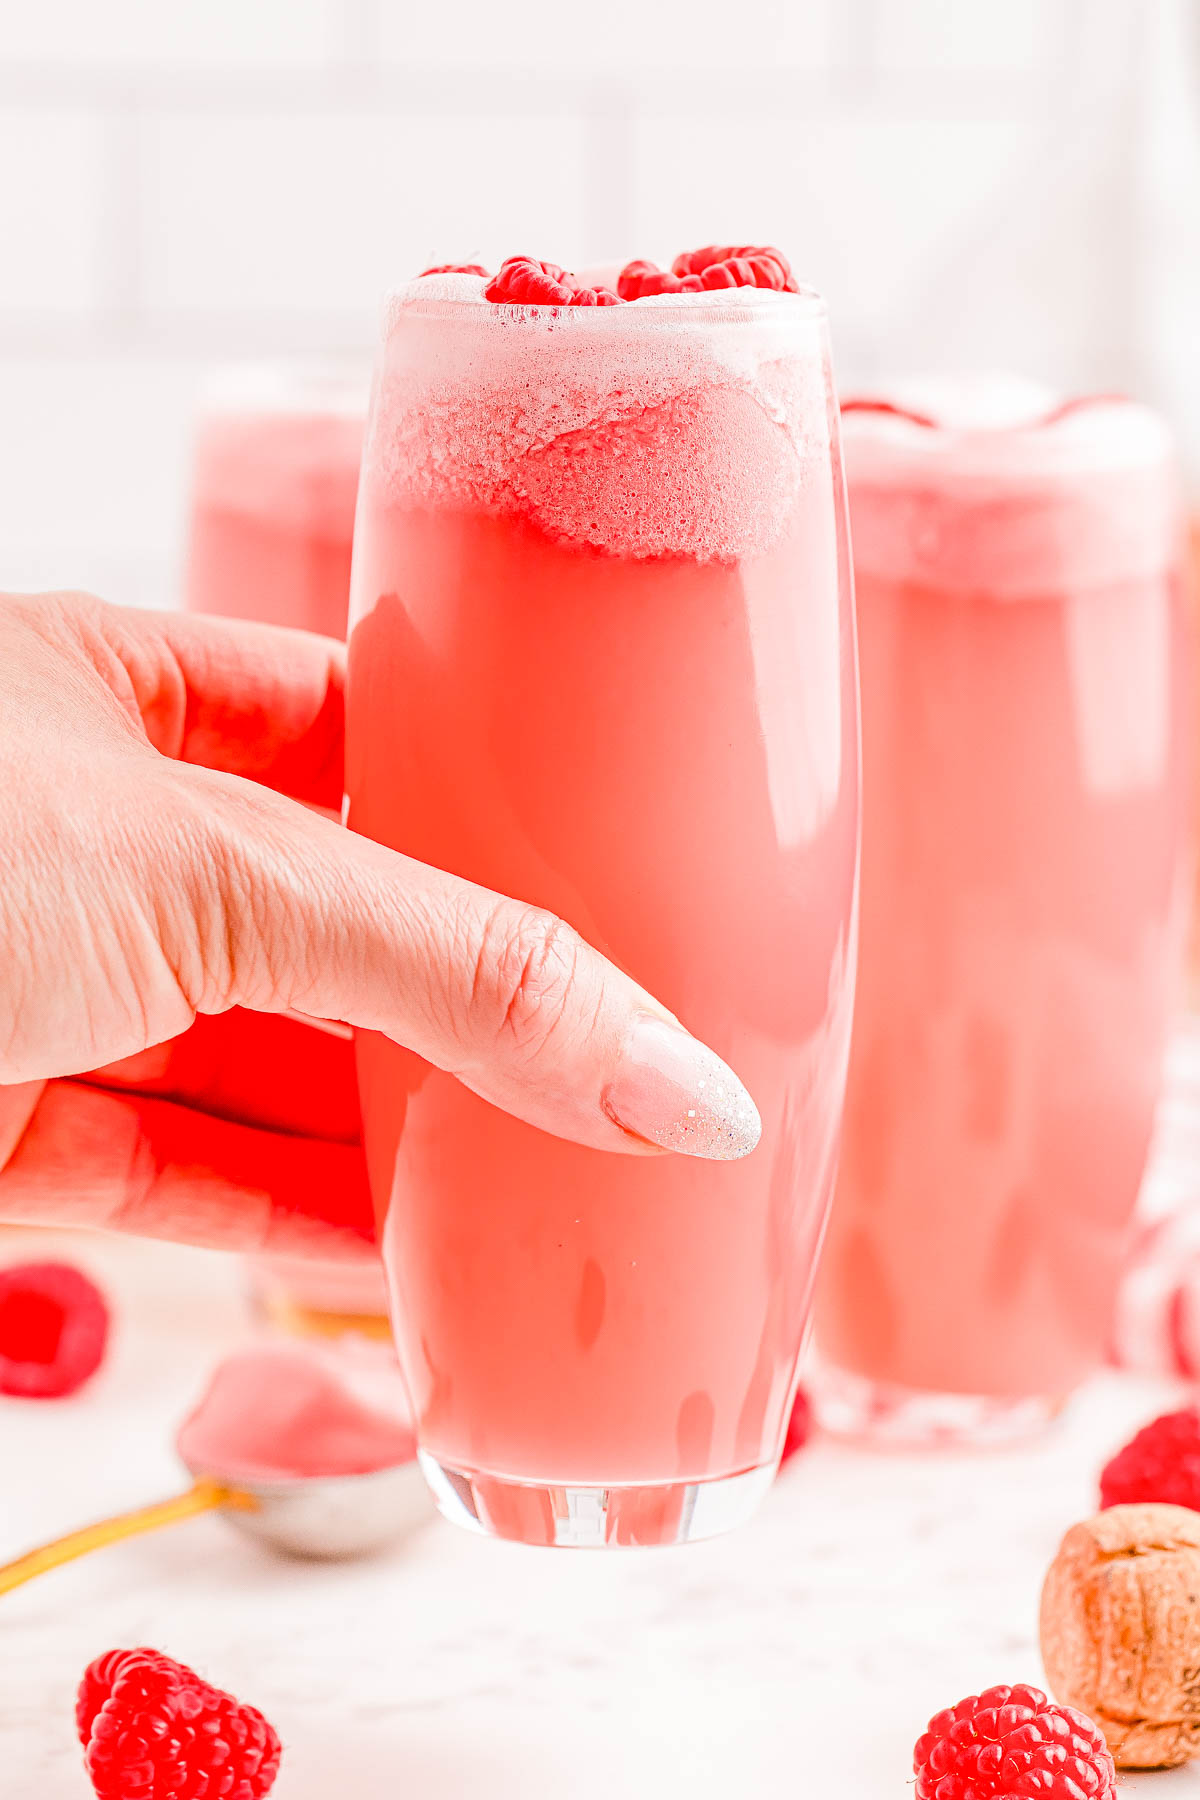 A hand holds a tall glass filled with pink beverage and garnished with raspberries. Several similar glasses and scattered raspberries are seen in the background.